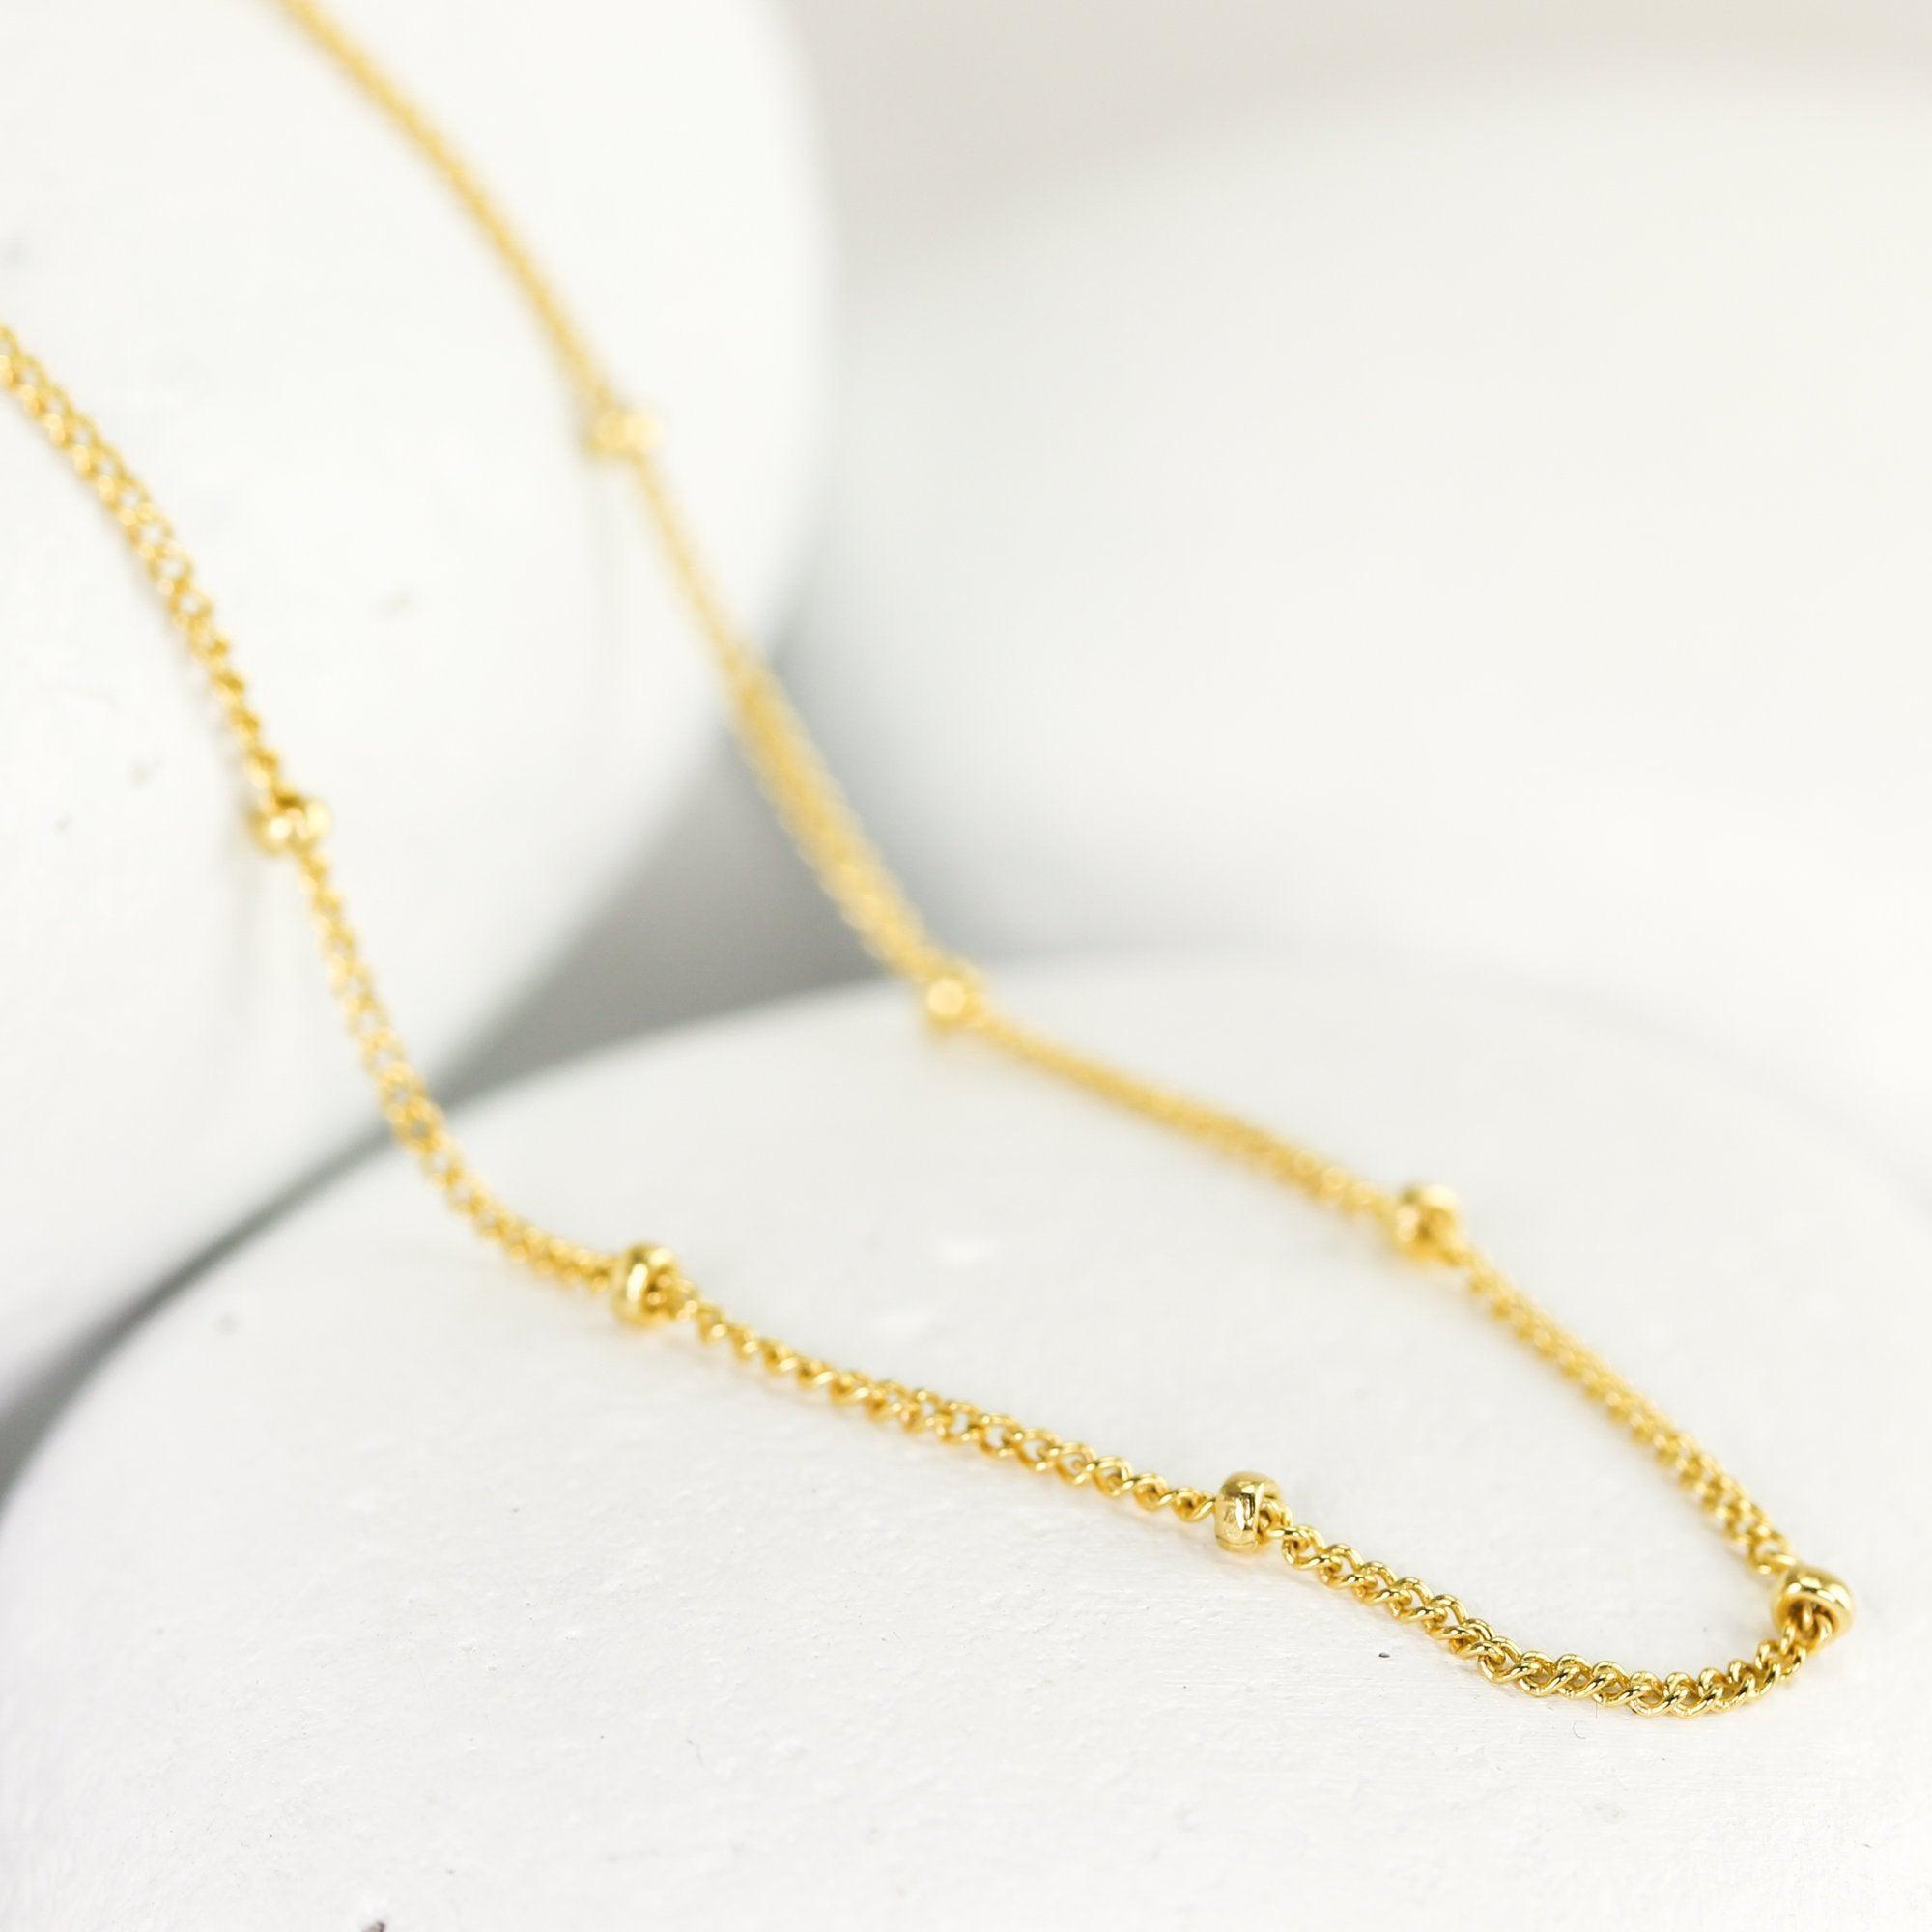 Long dainty beaded chain necklace featuring faceted bead details with star  accents. Approximately 32